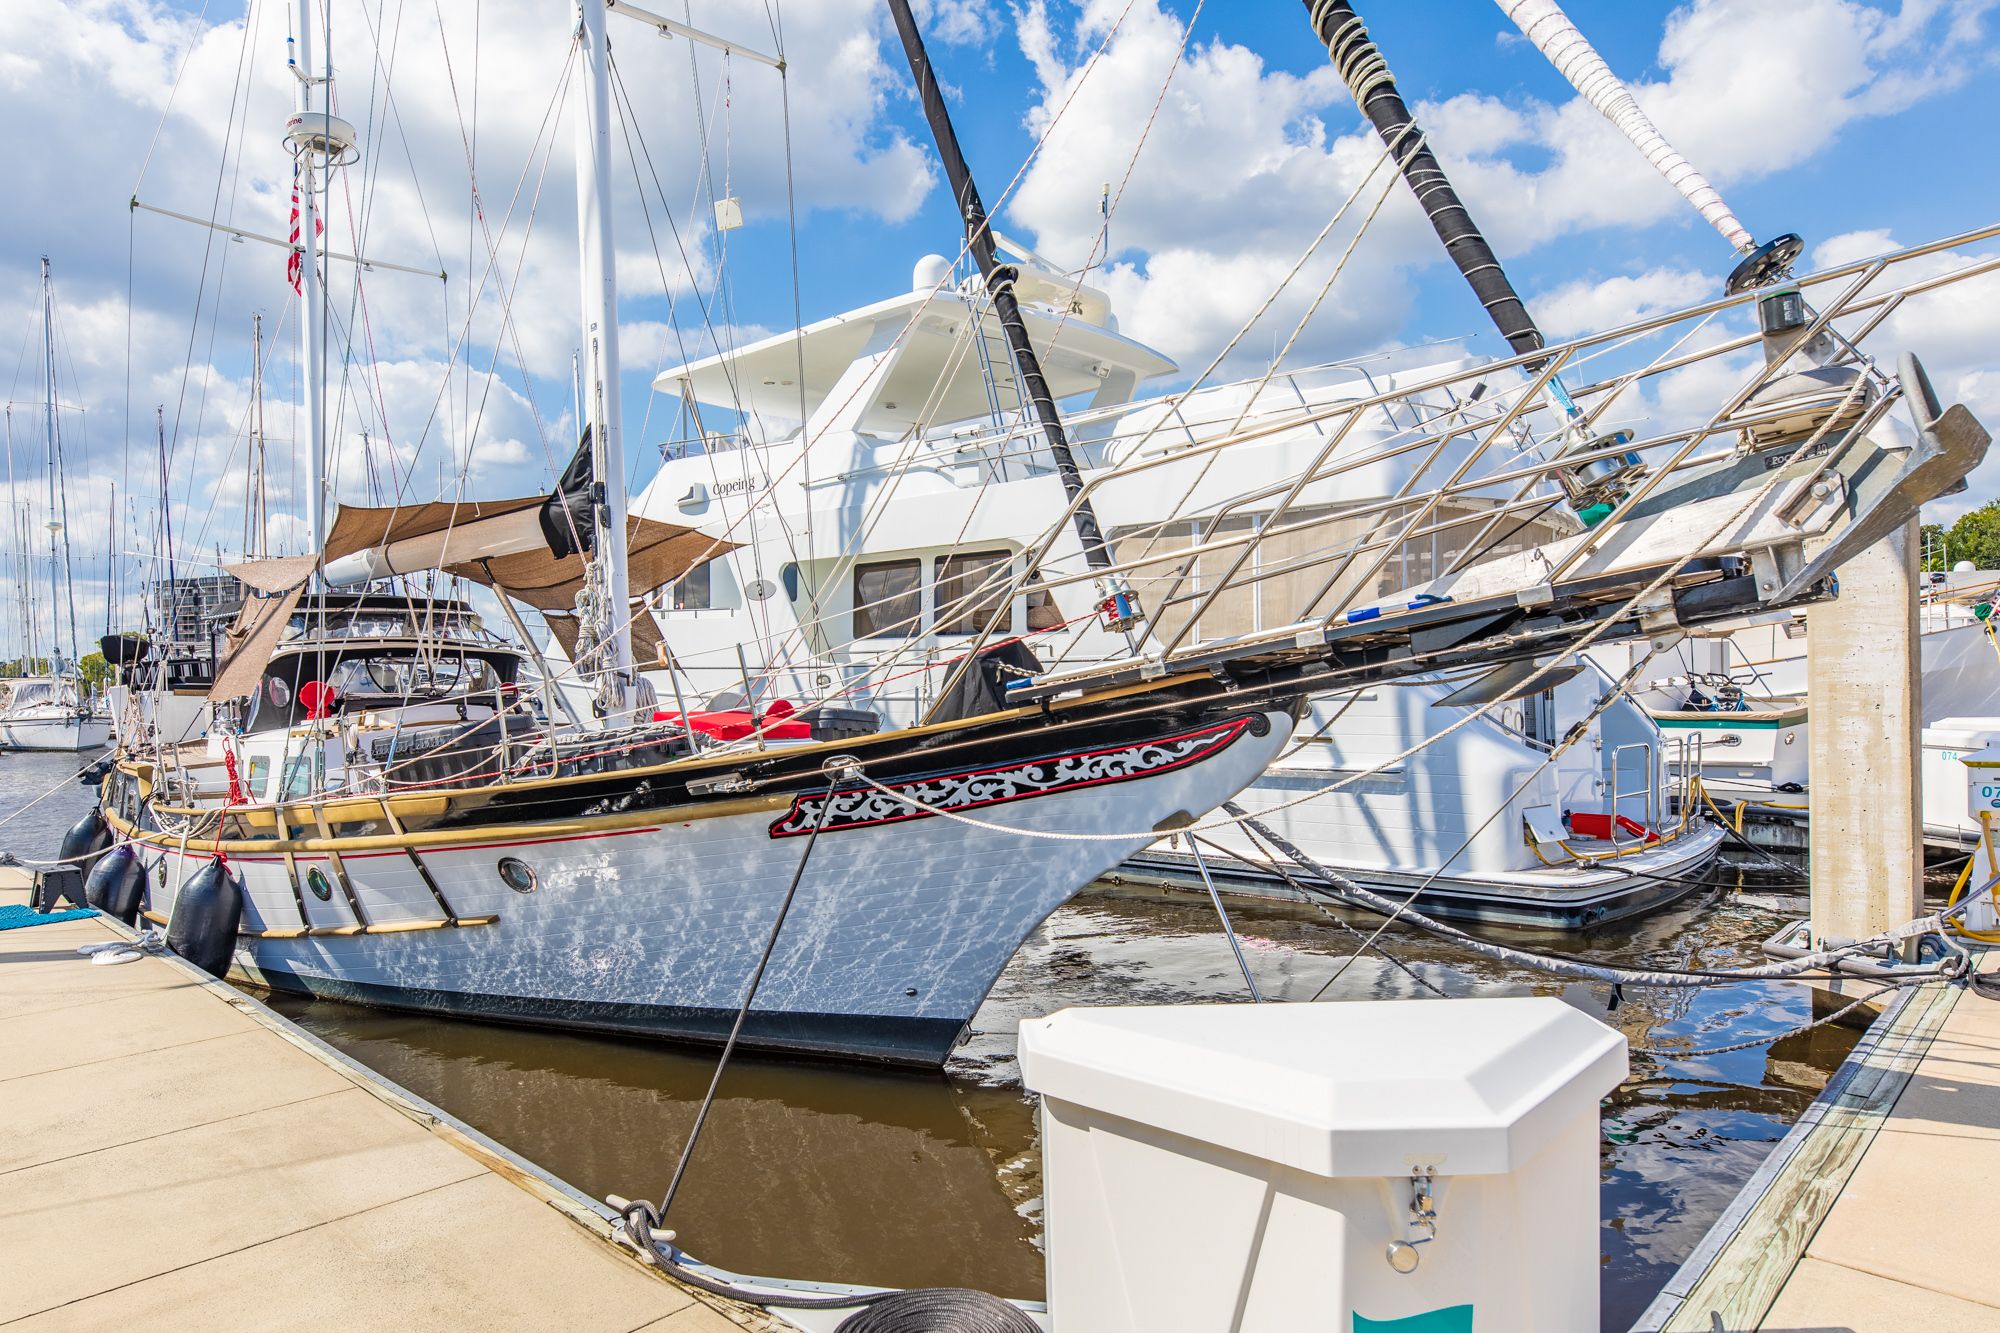 47' sailboat for sale